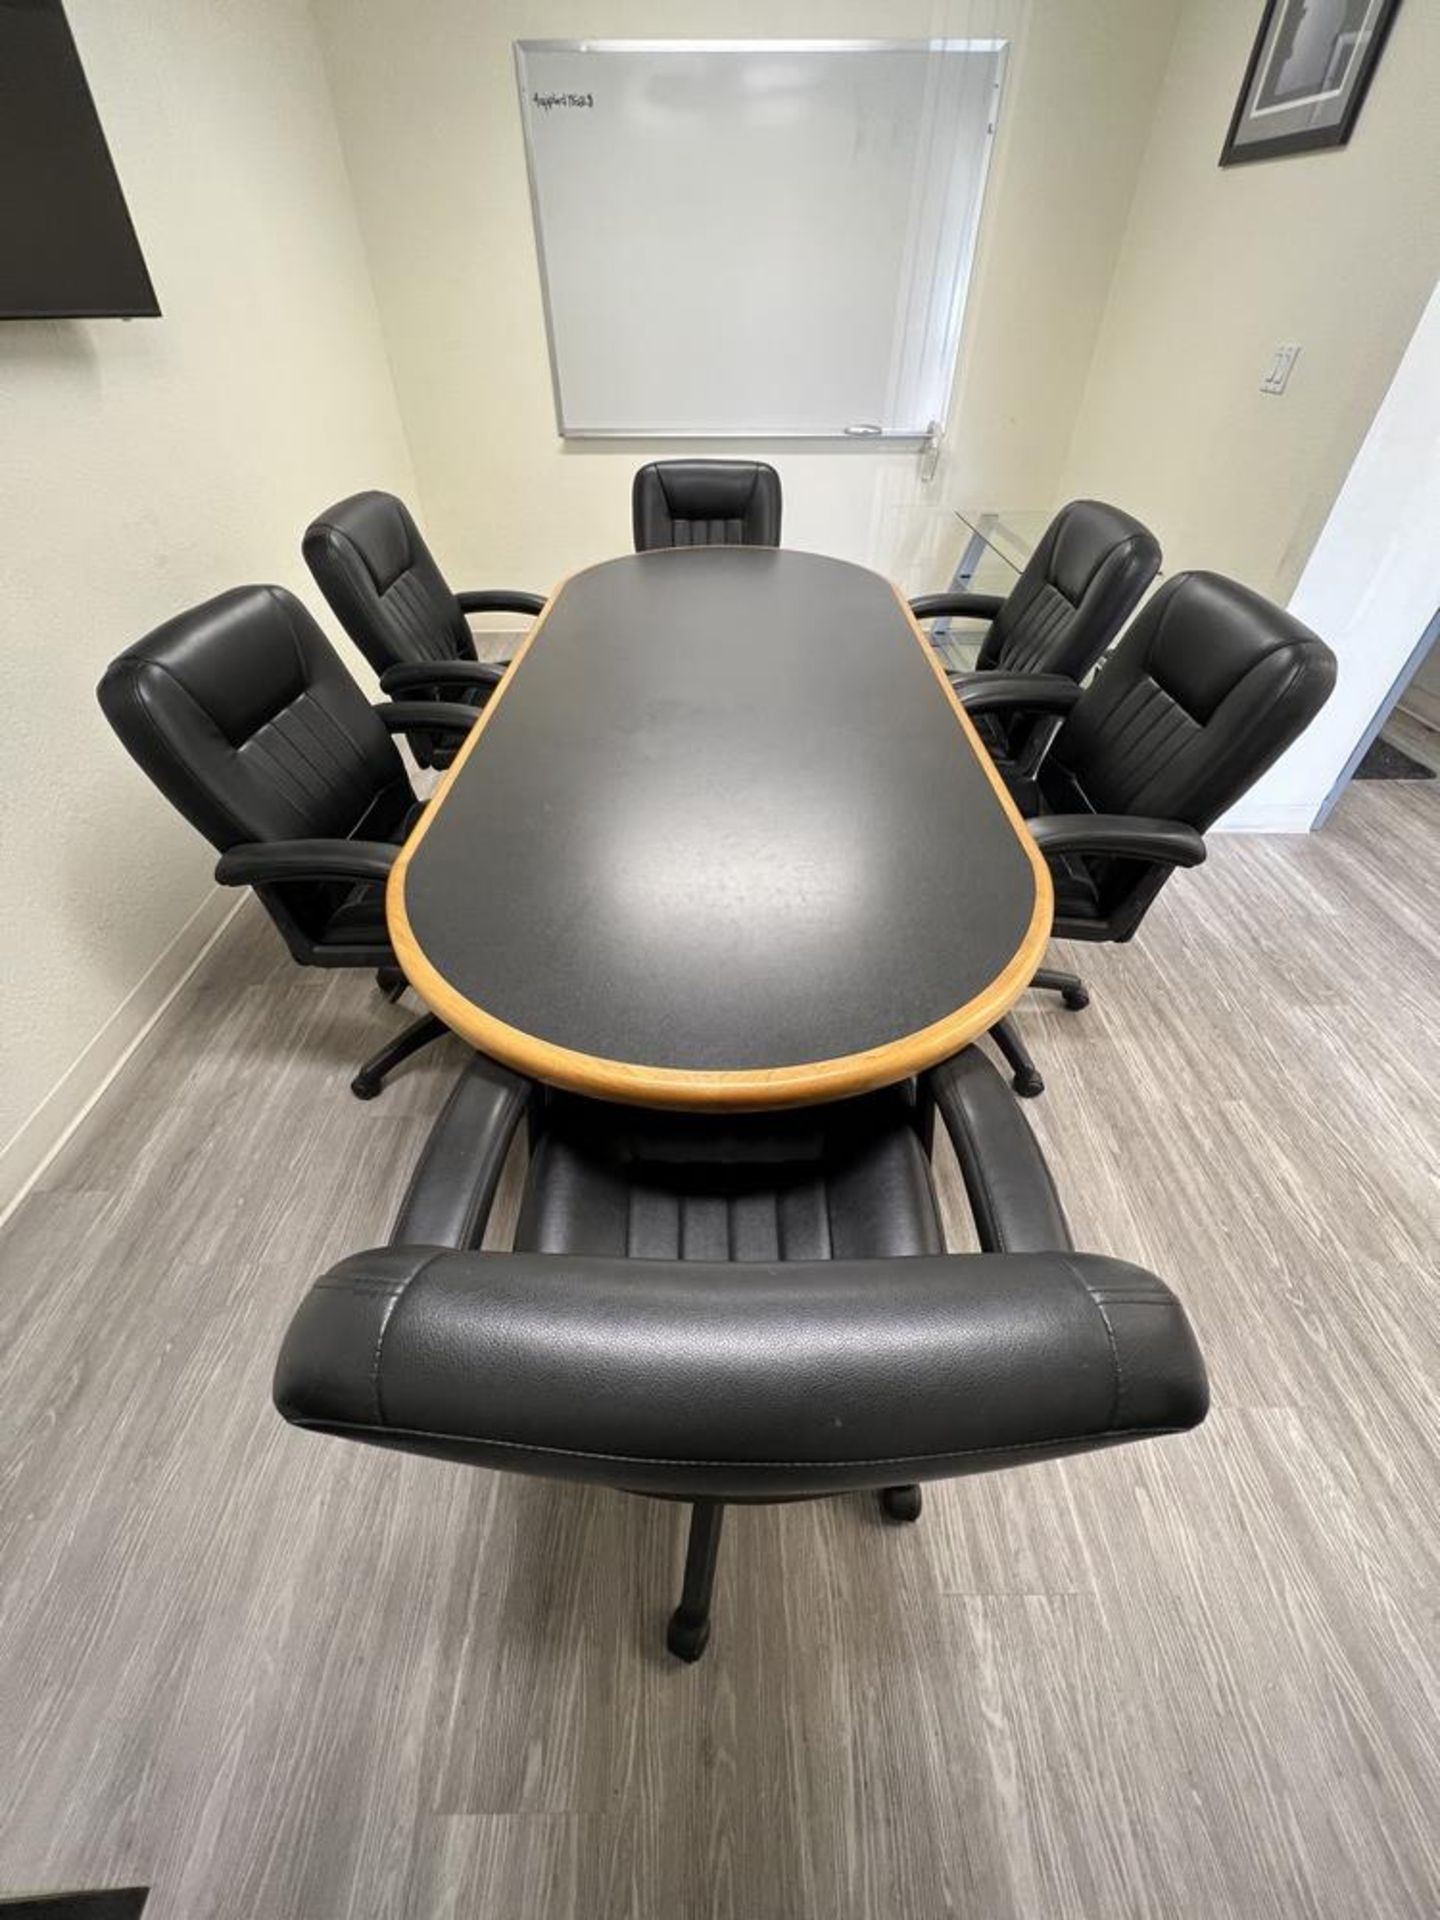 Conference Table With (6) Chairs 98" x 41 1/2" x 30"